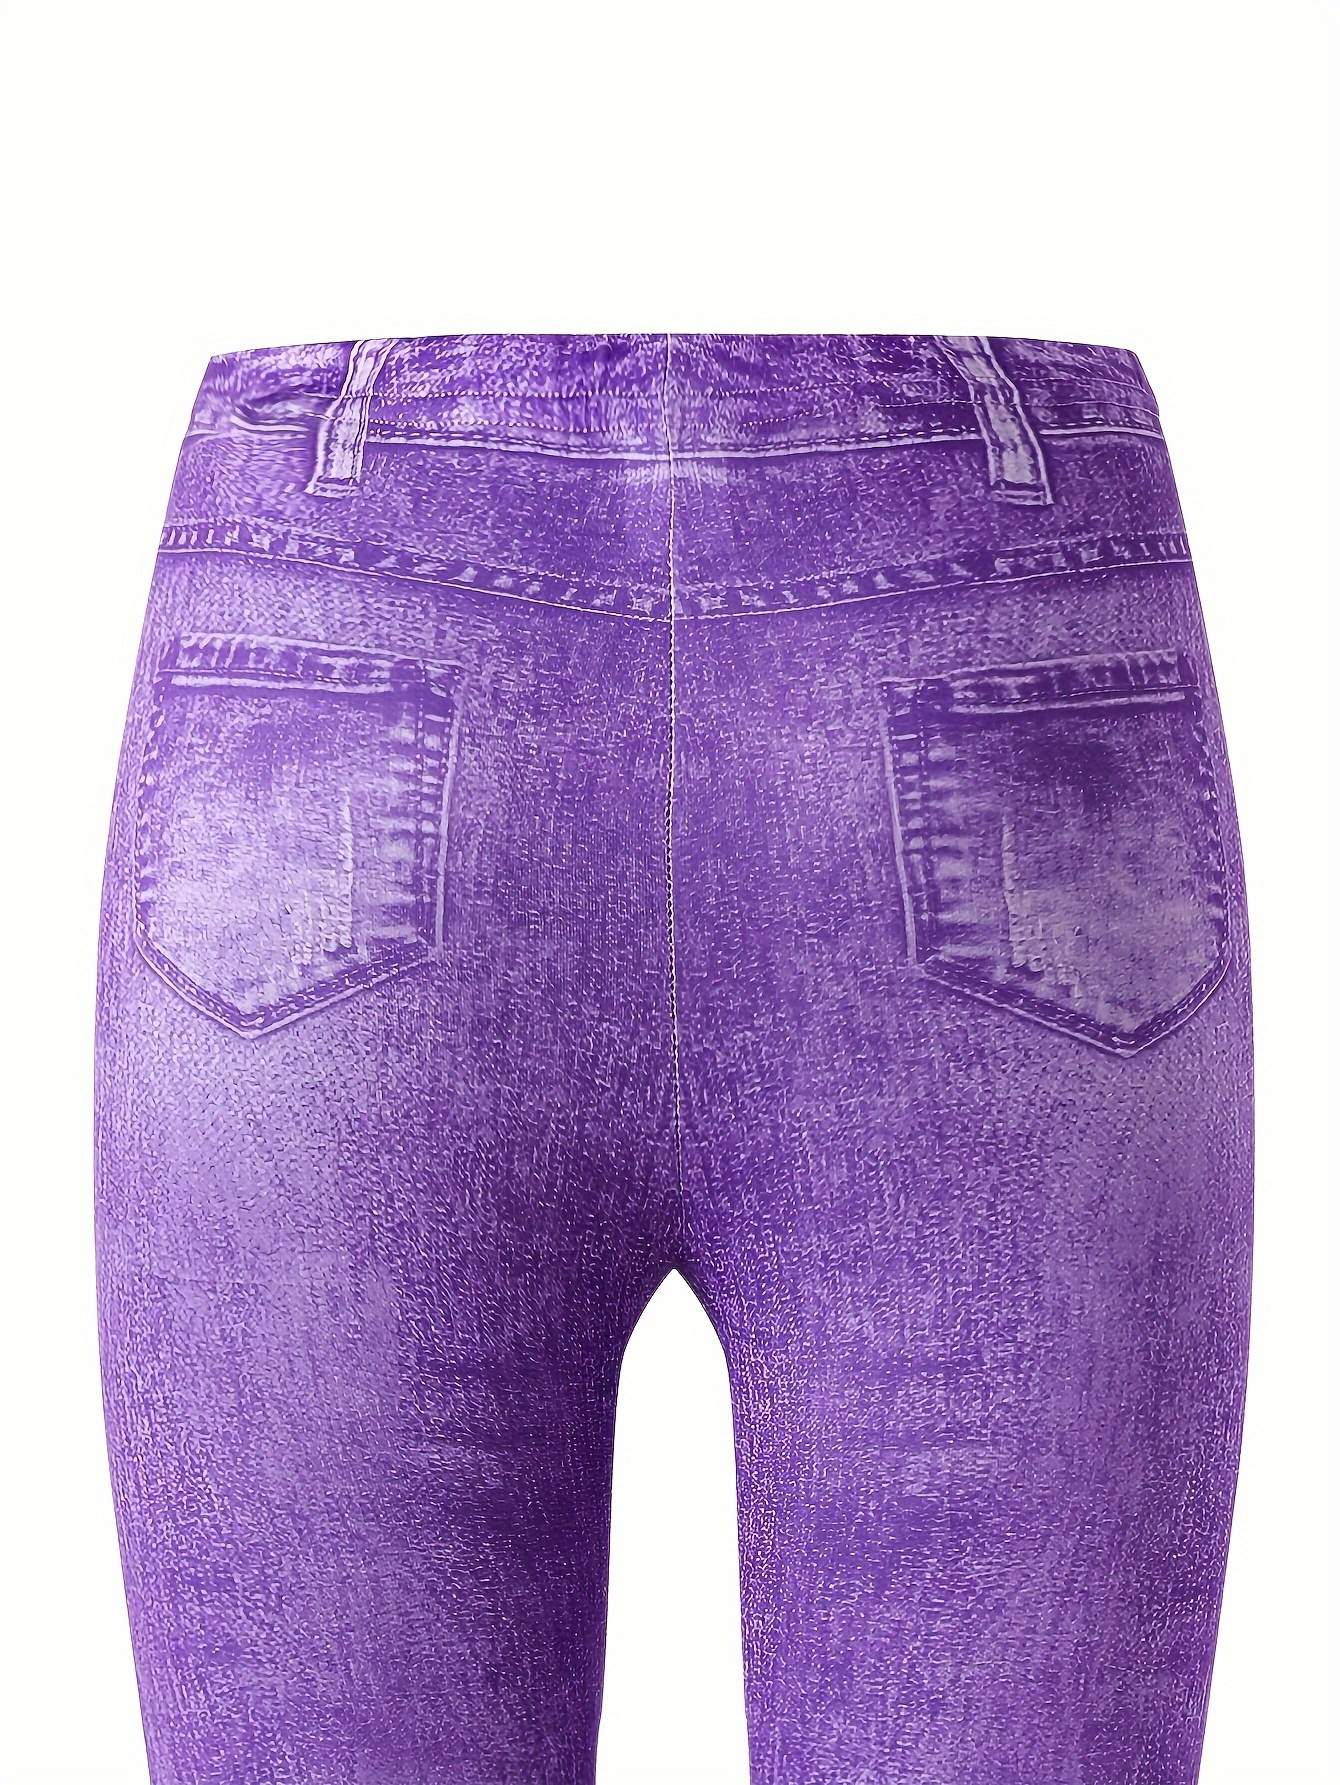 Buy Girls Jeans and Pants with Butterfly Print – Mumkins